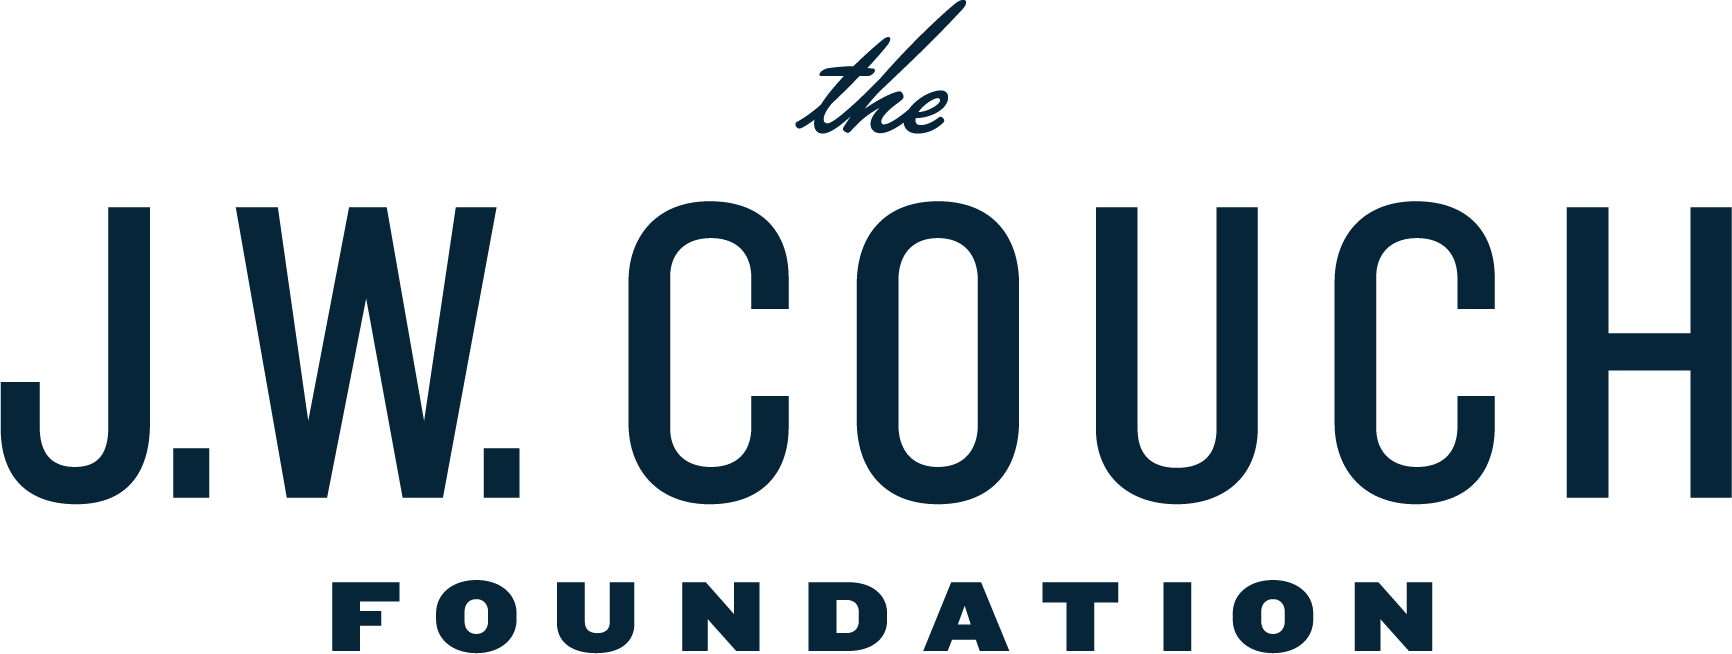 The J.W. Couch Foundation